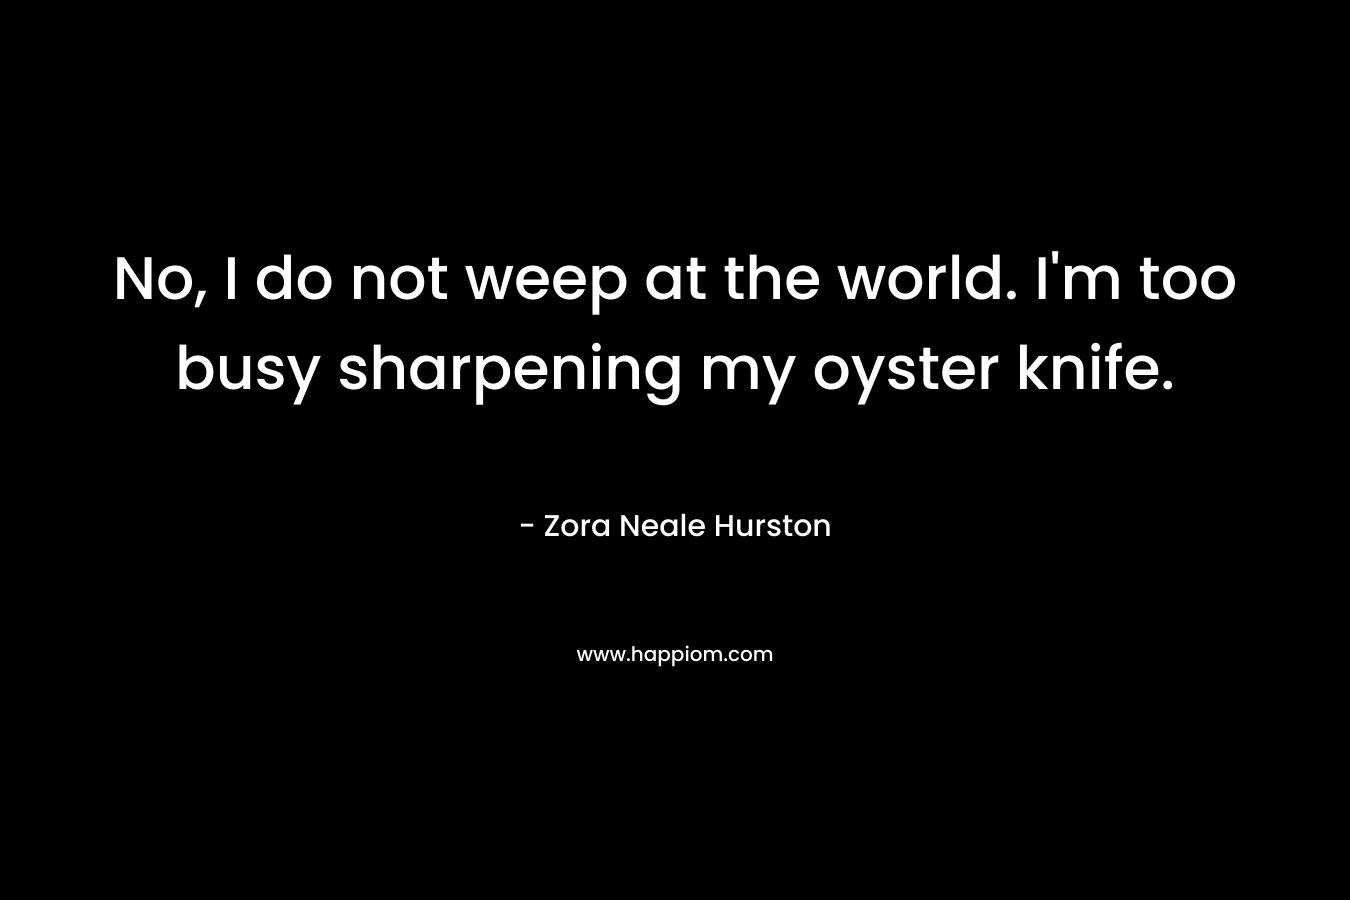 No, I do not weep at the world. I’m too busy sharpening my oyster knife. – Zora Neale Hurston